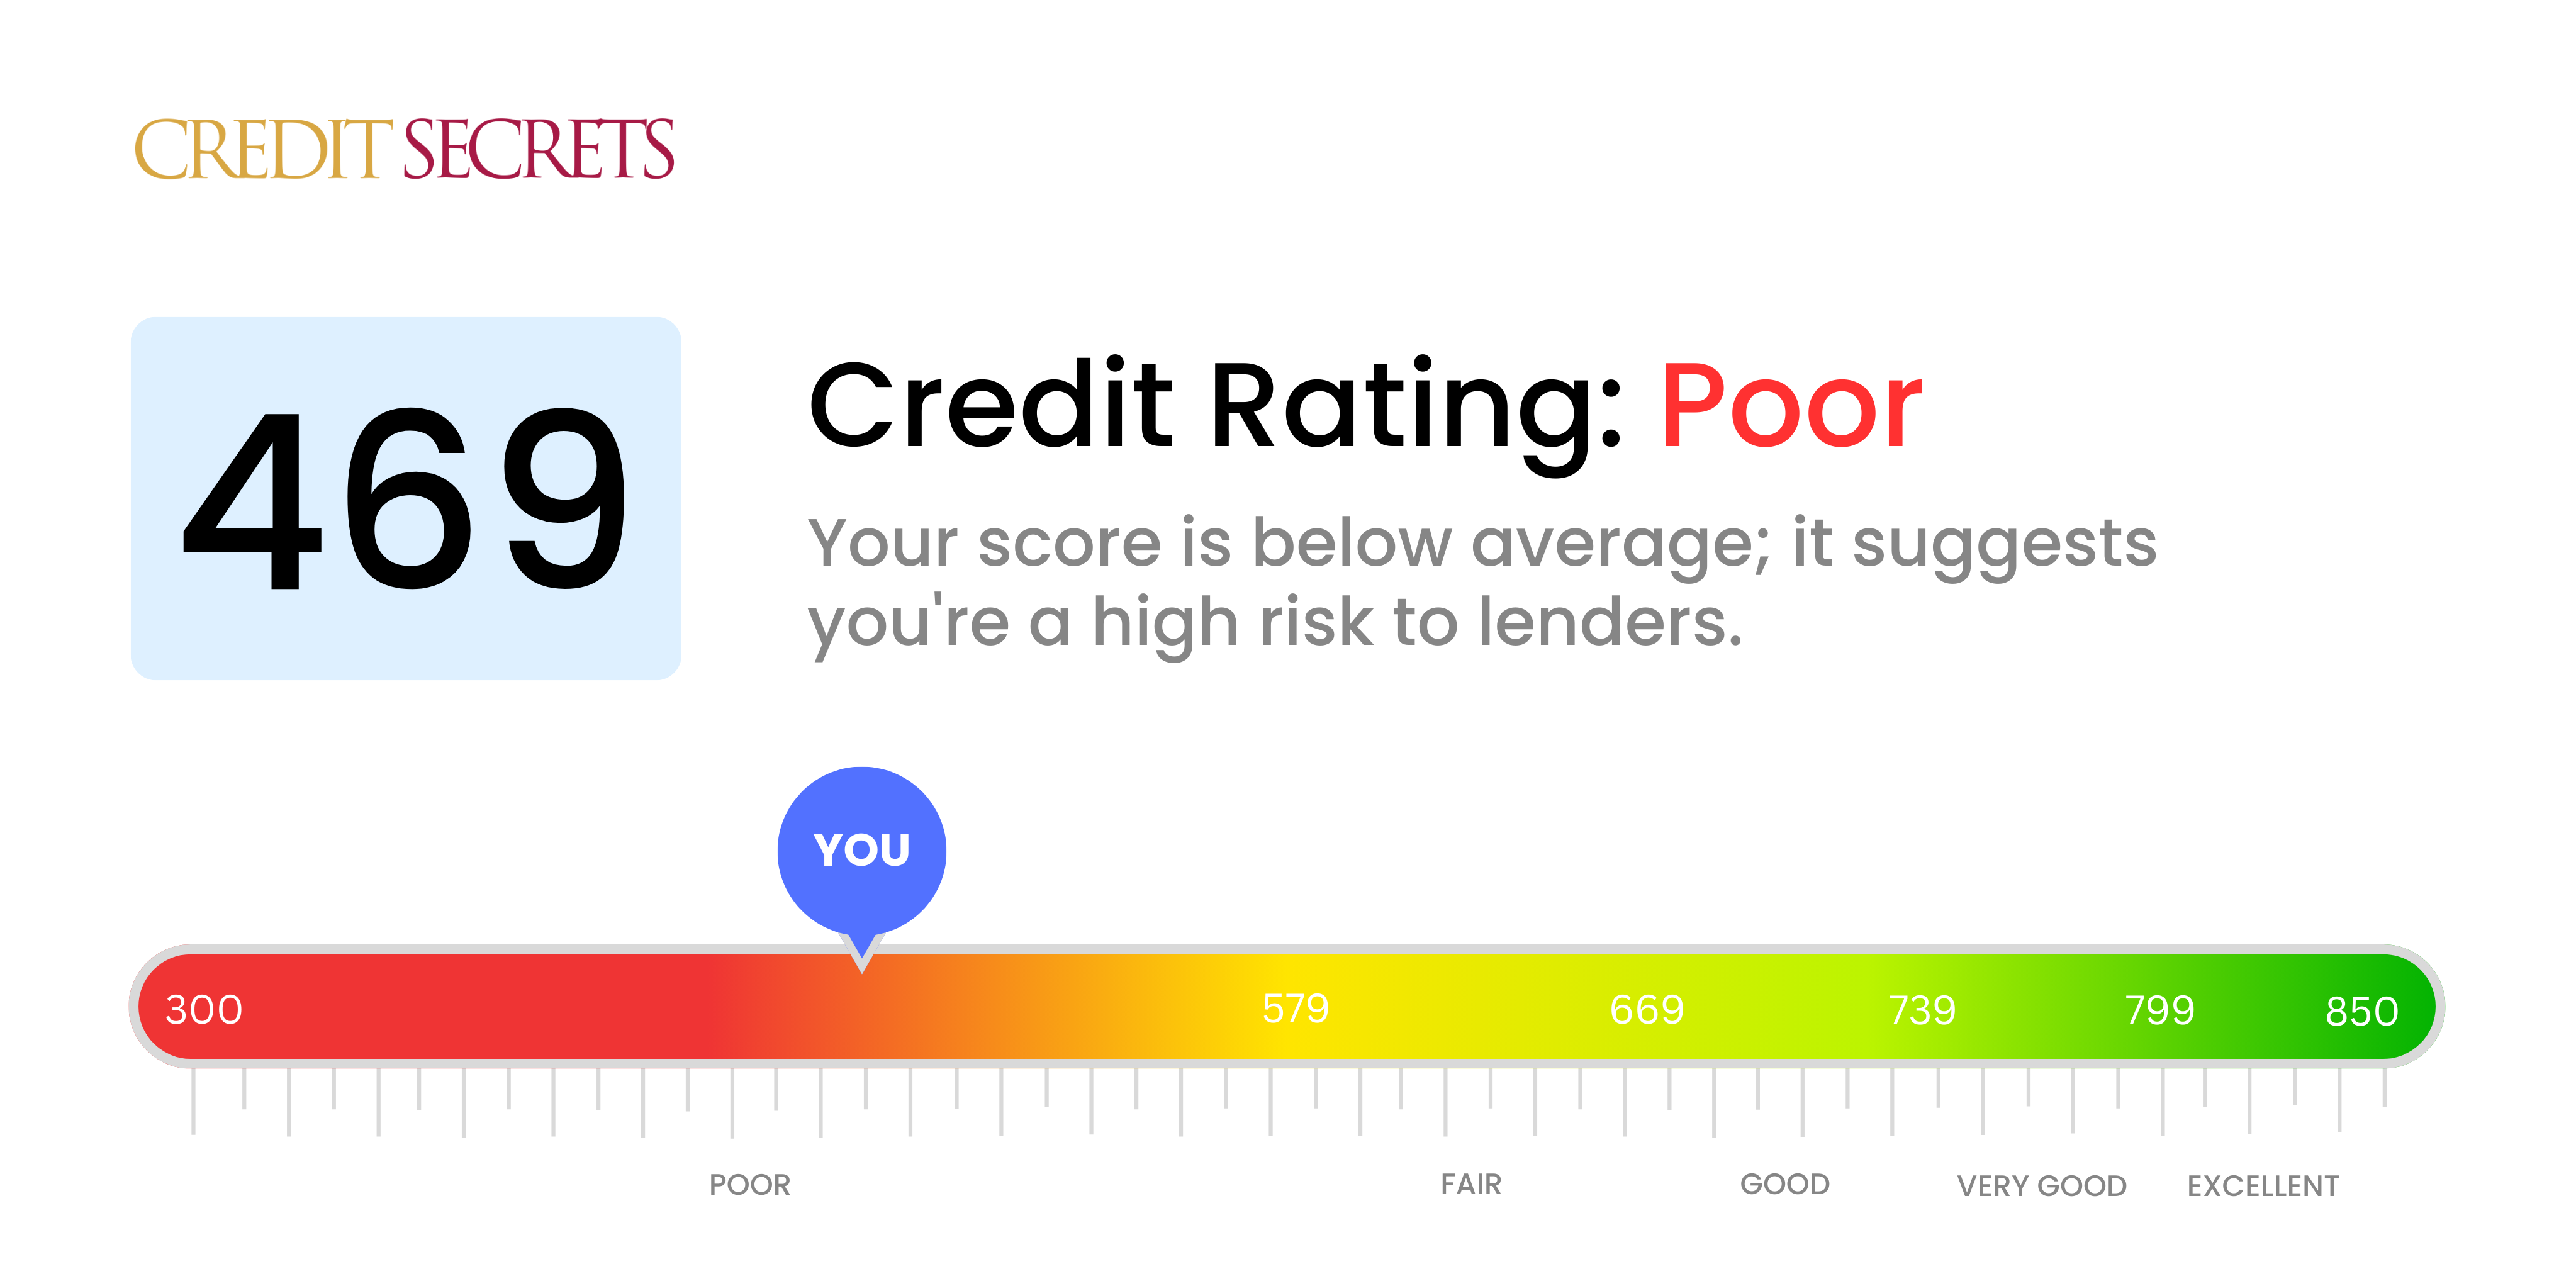 Is 469 a good credit score?